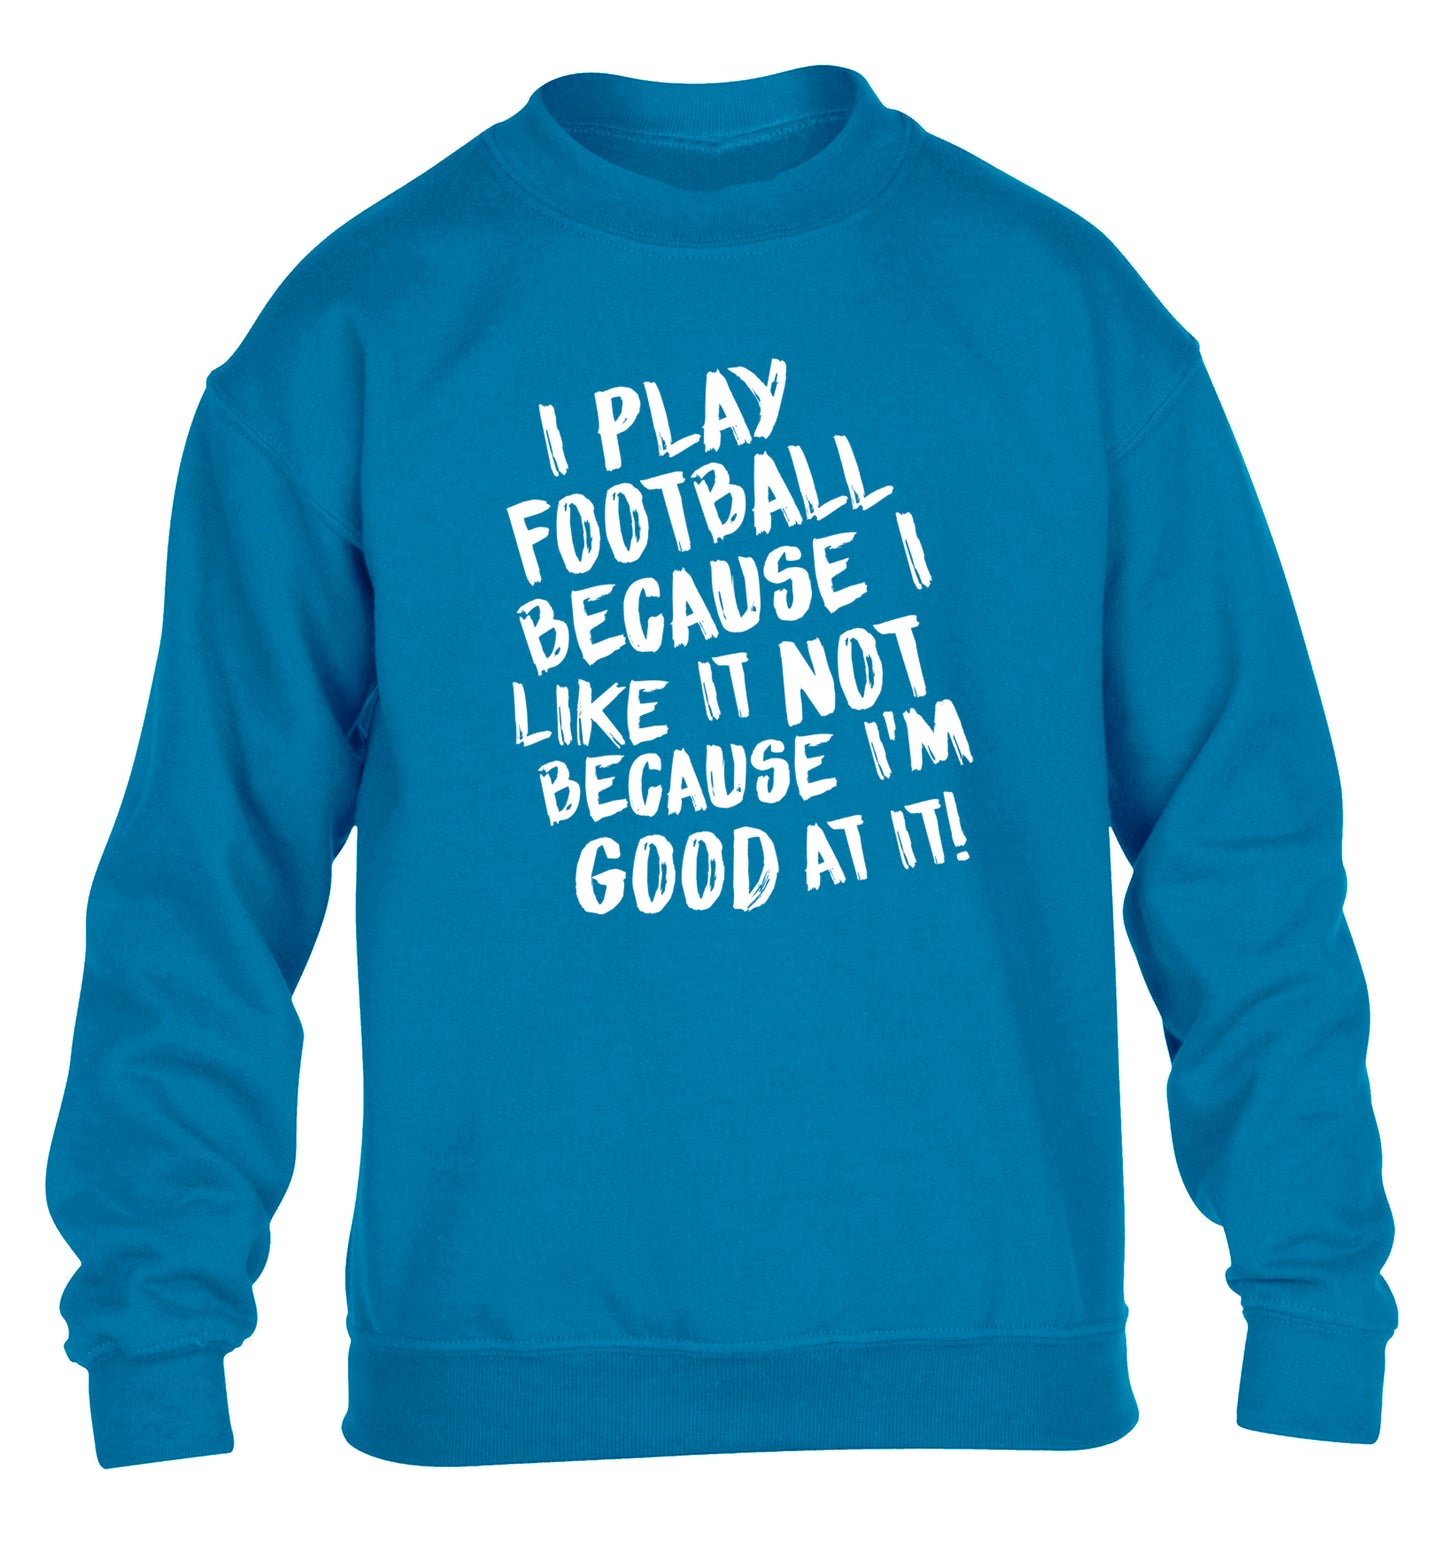 I play football because I like it not because I'm good at it children's blue sweater 12-14 Years